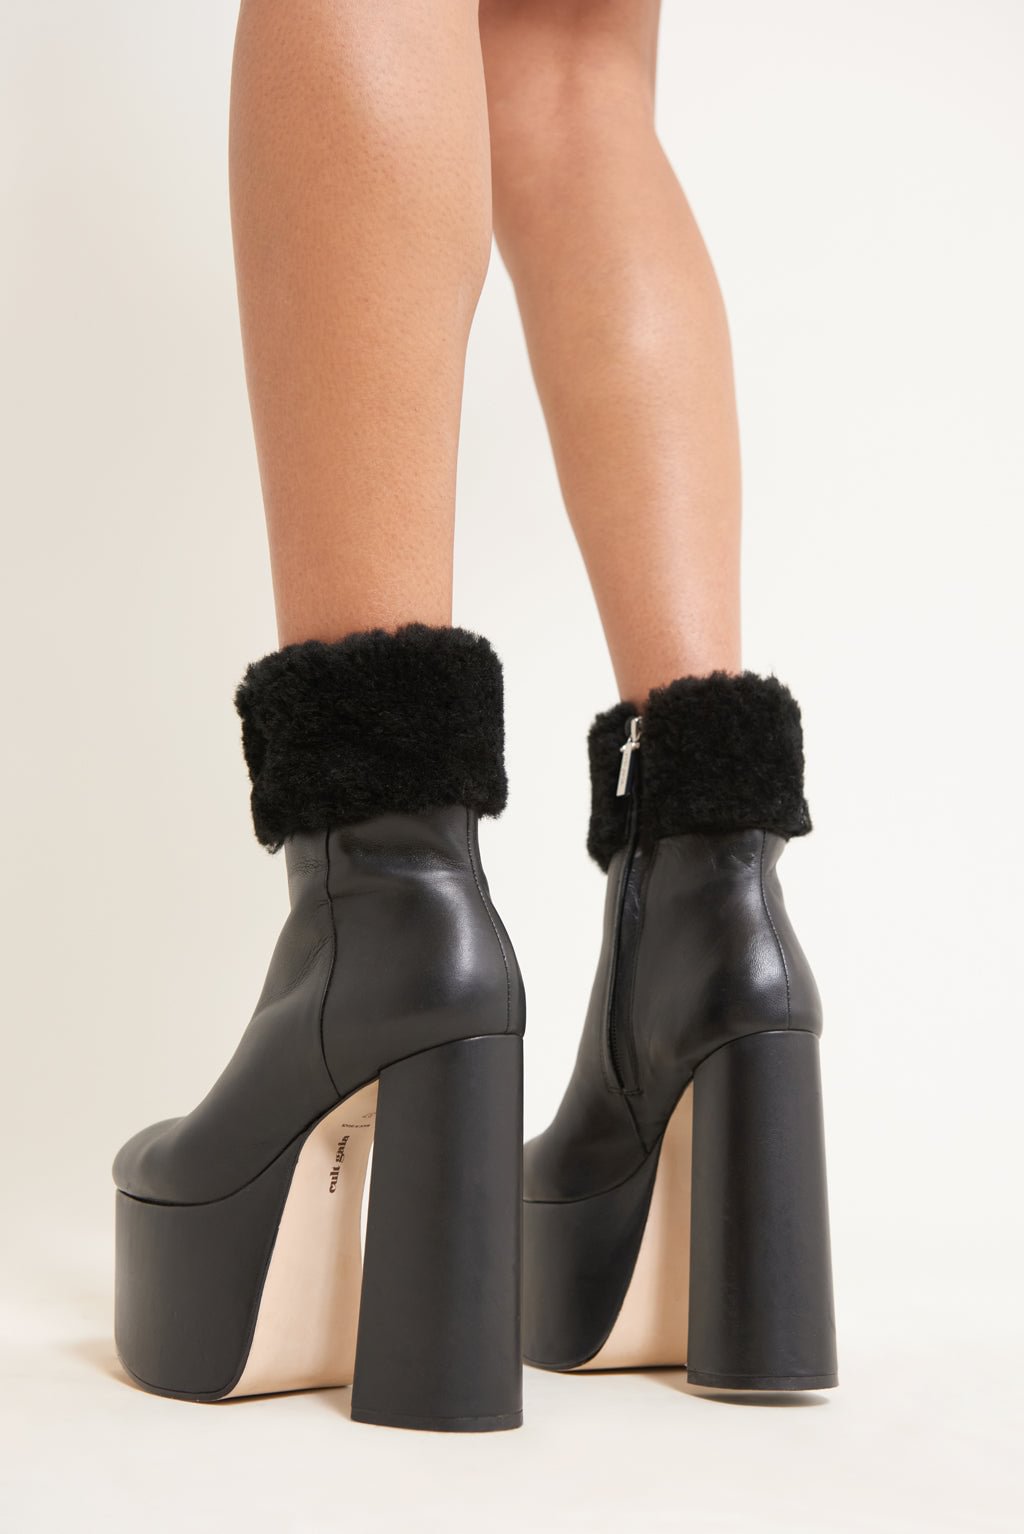 Black Leather Furry Boots With Platform Block Heel Ankle Boots Nicepairs